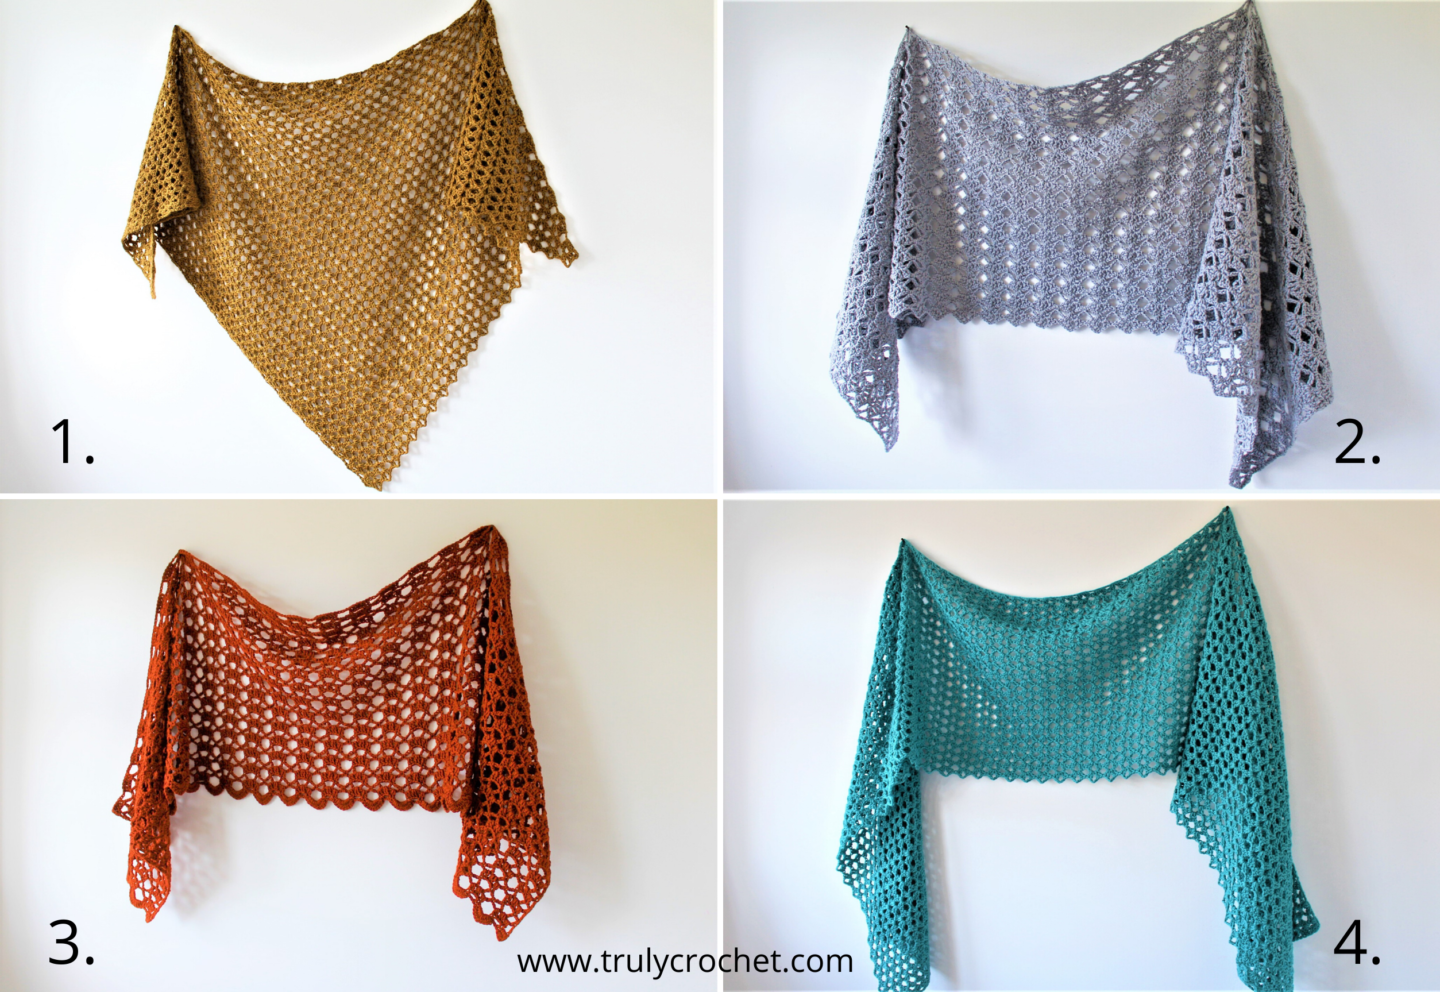 Related posts of other free crochet shawl patterns